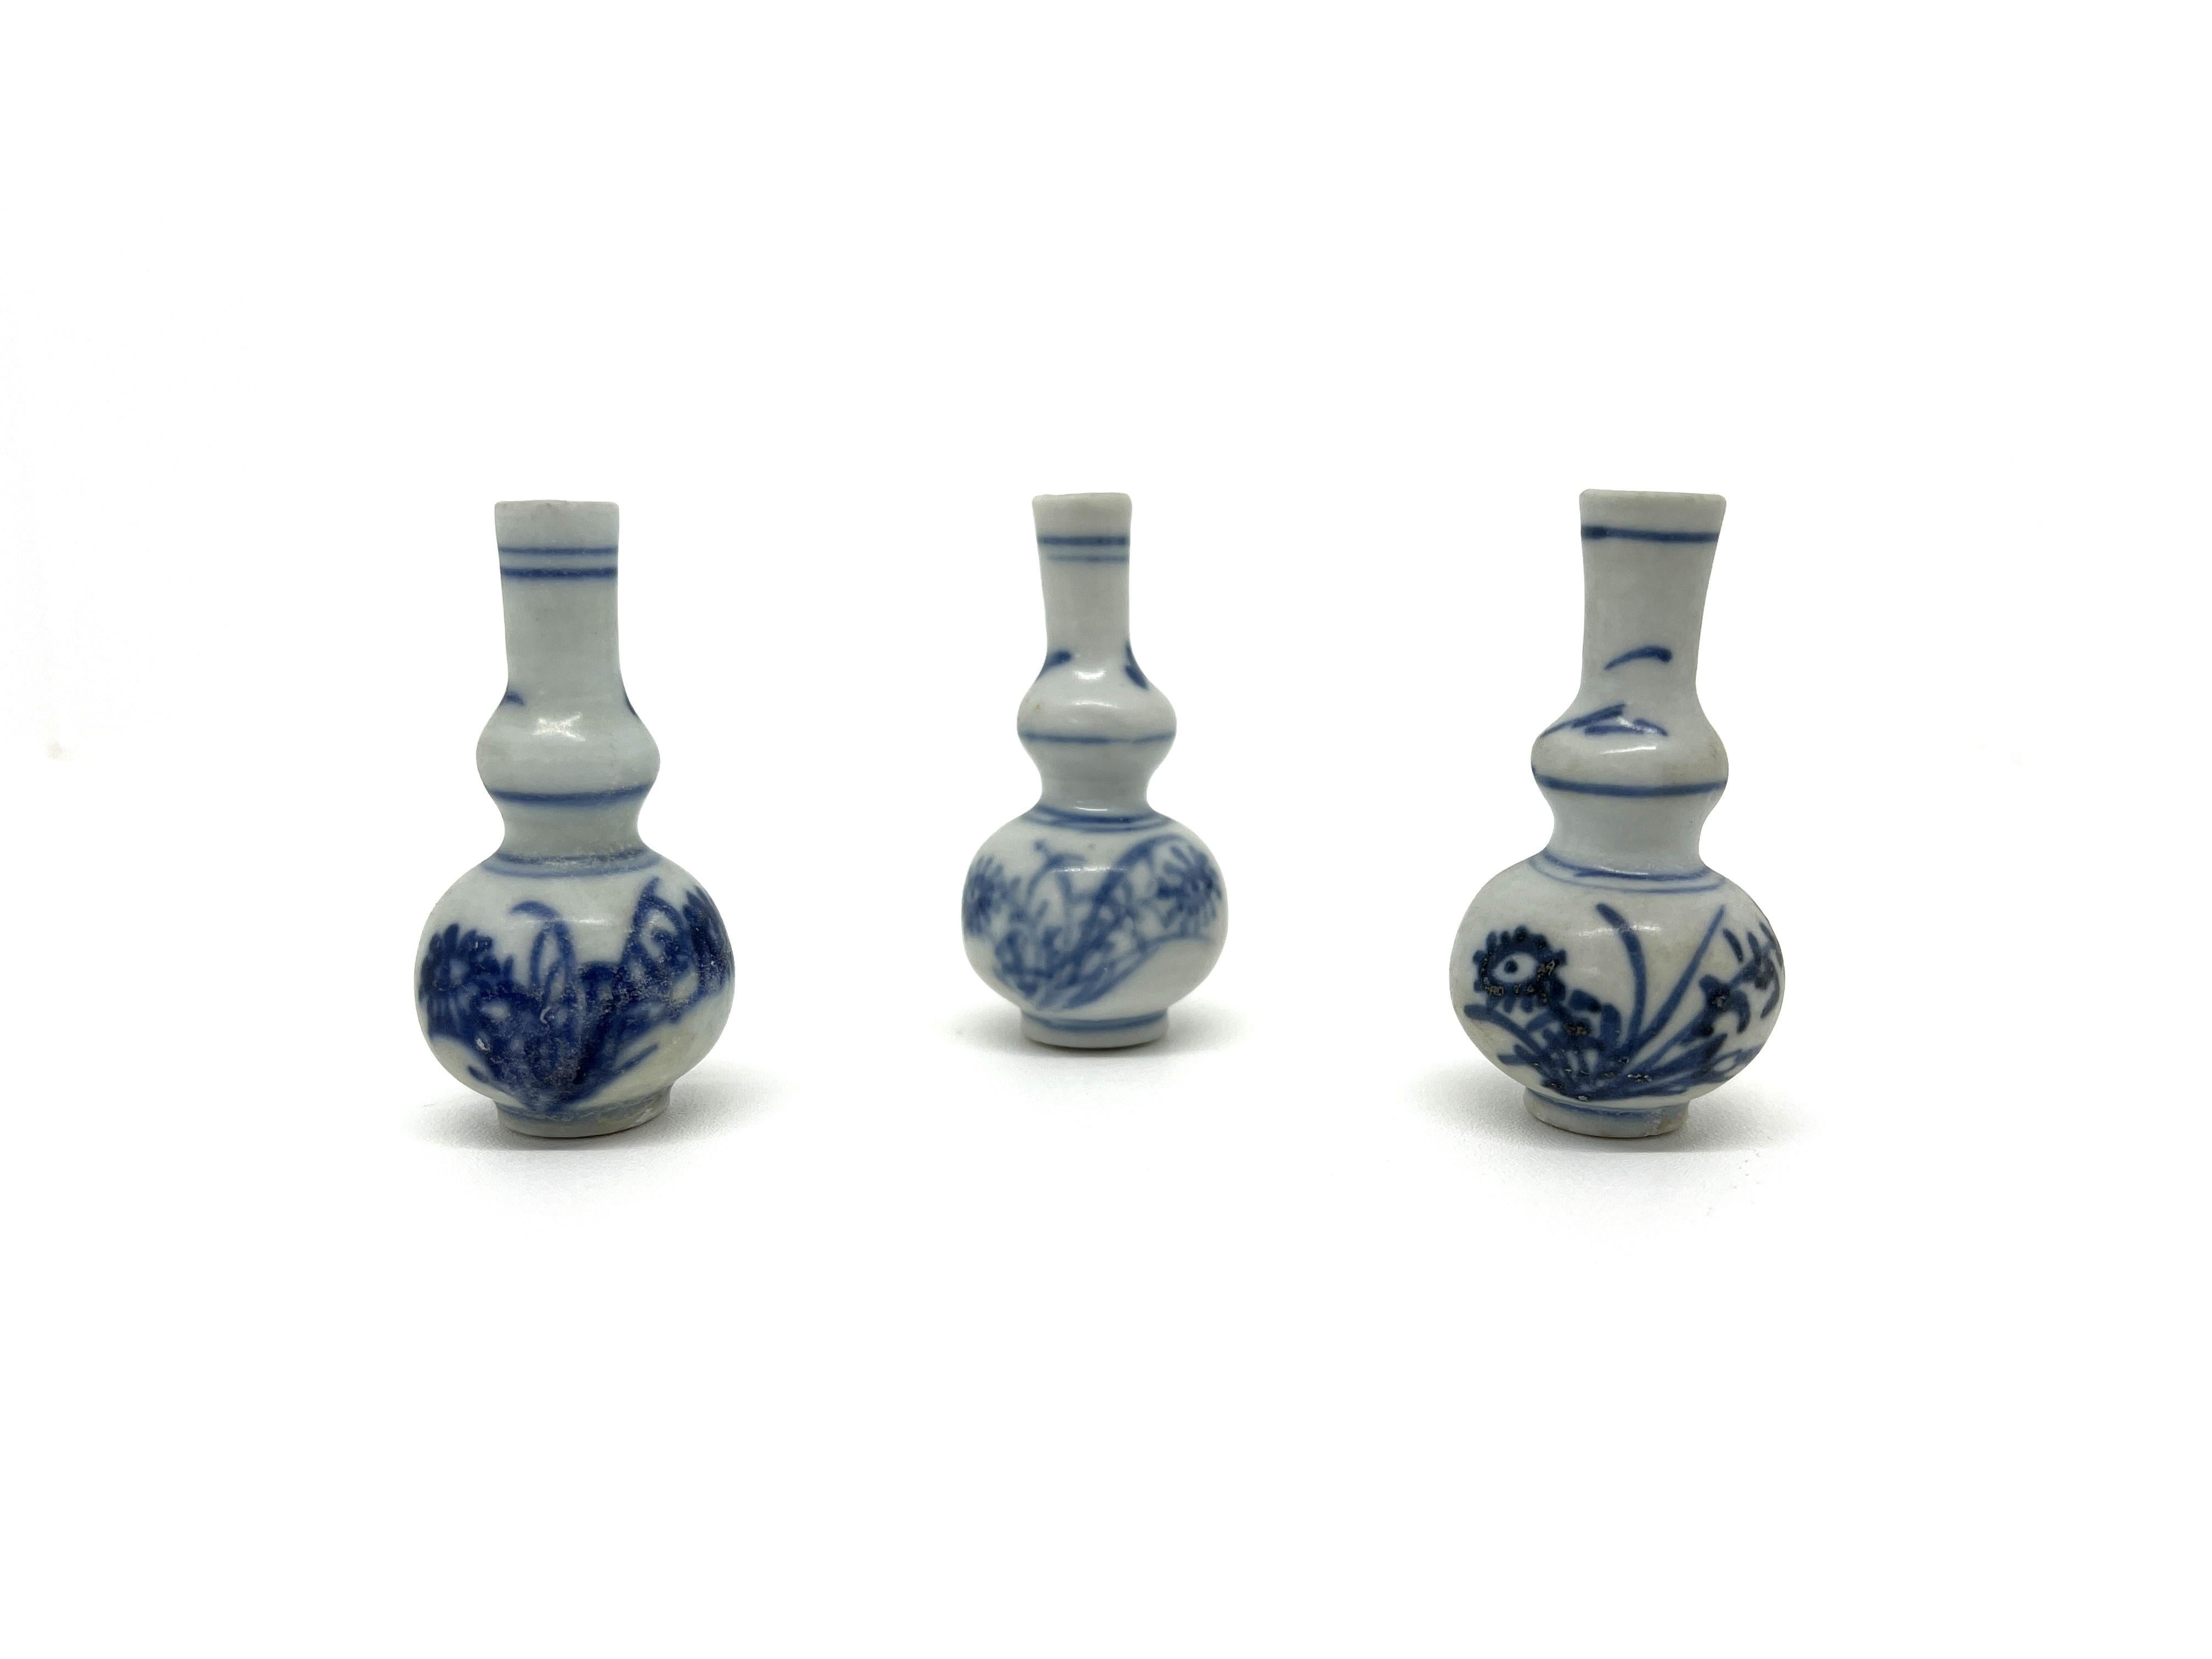 During Yongzheng era, such miniatures were appreciated for their craftsmanship and aesthetic value. They were also often used in scholars' studios as part of the 'wenfang', or study room ensemble, which included various objects intended to inspire